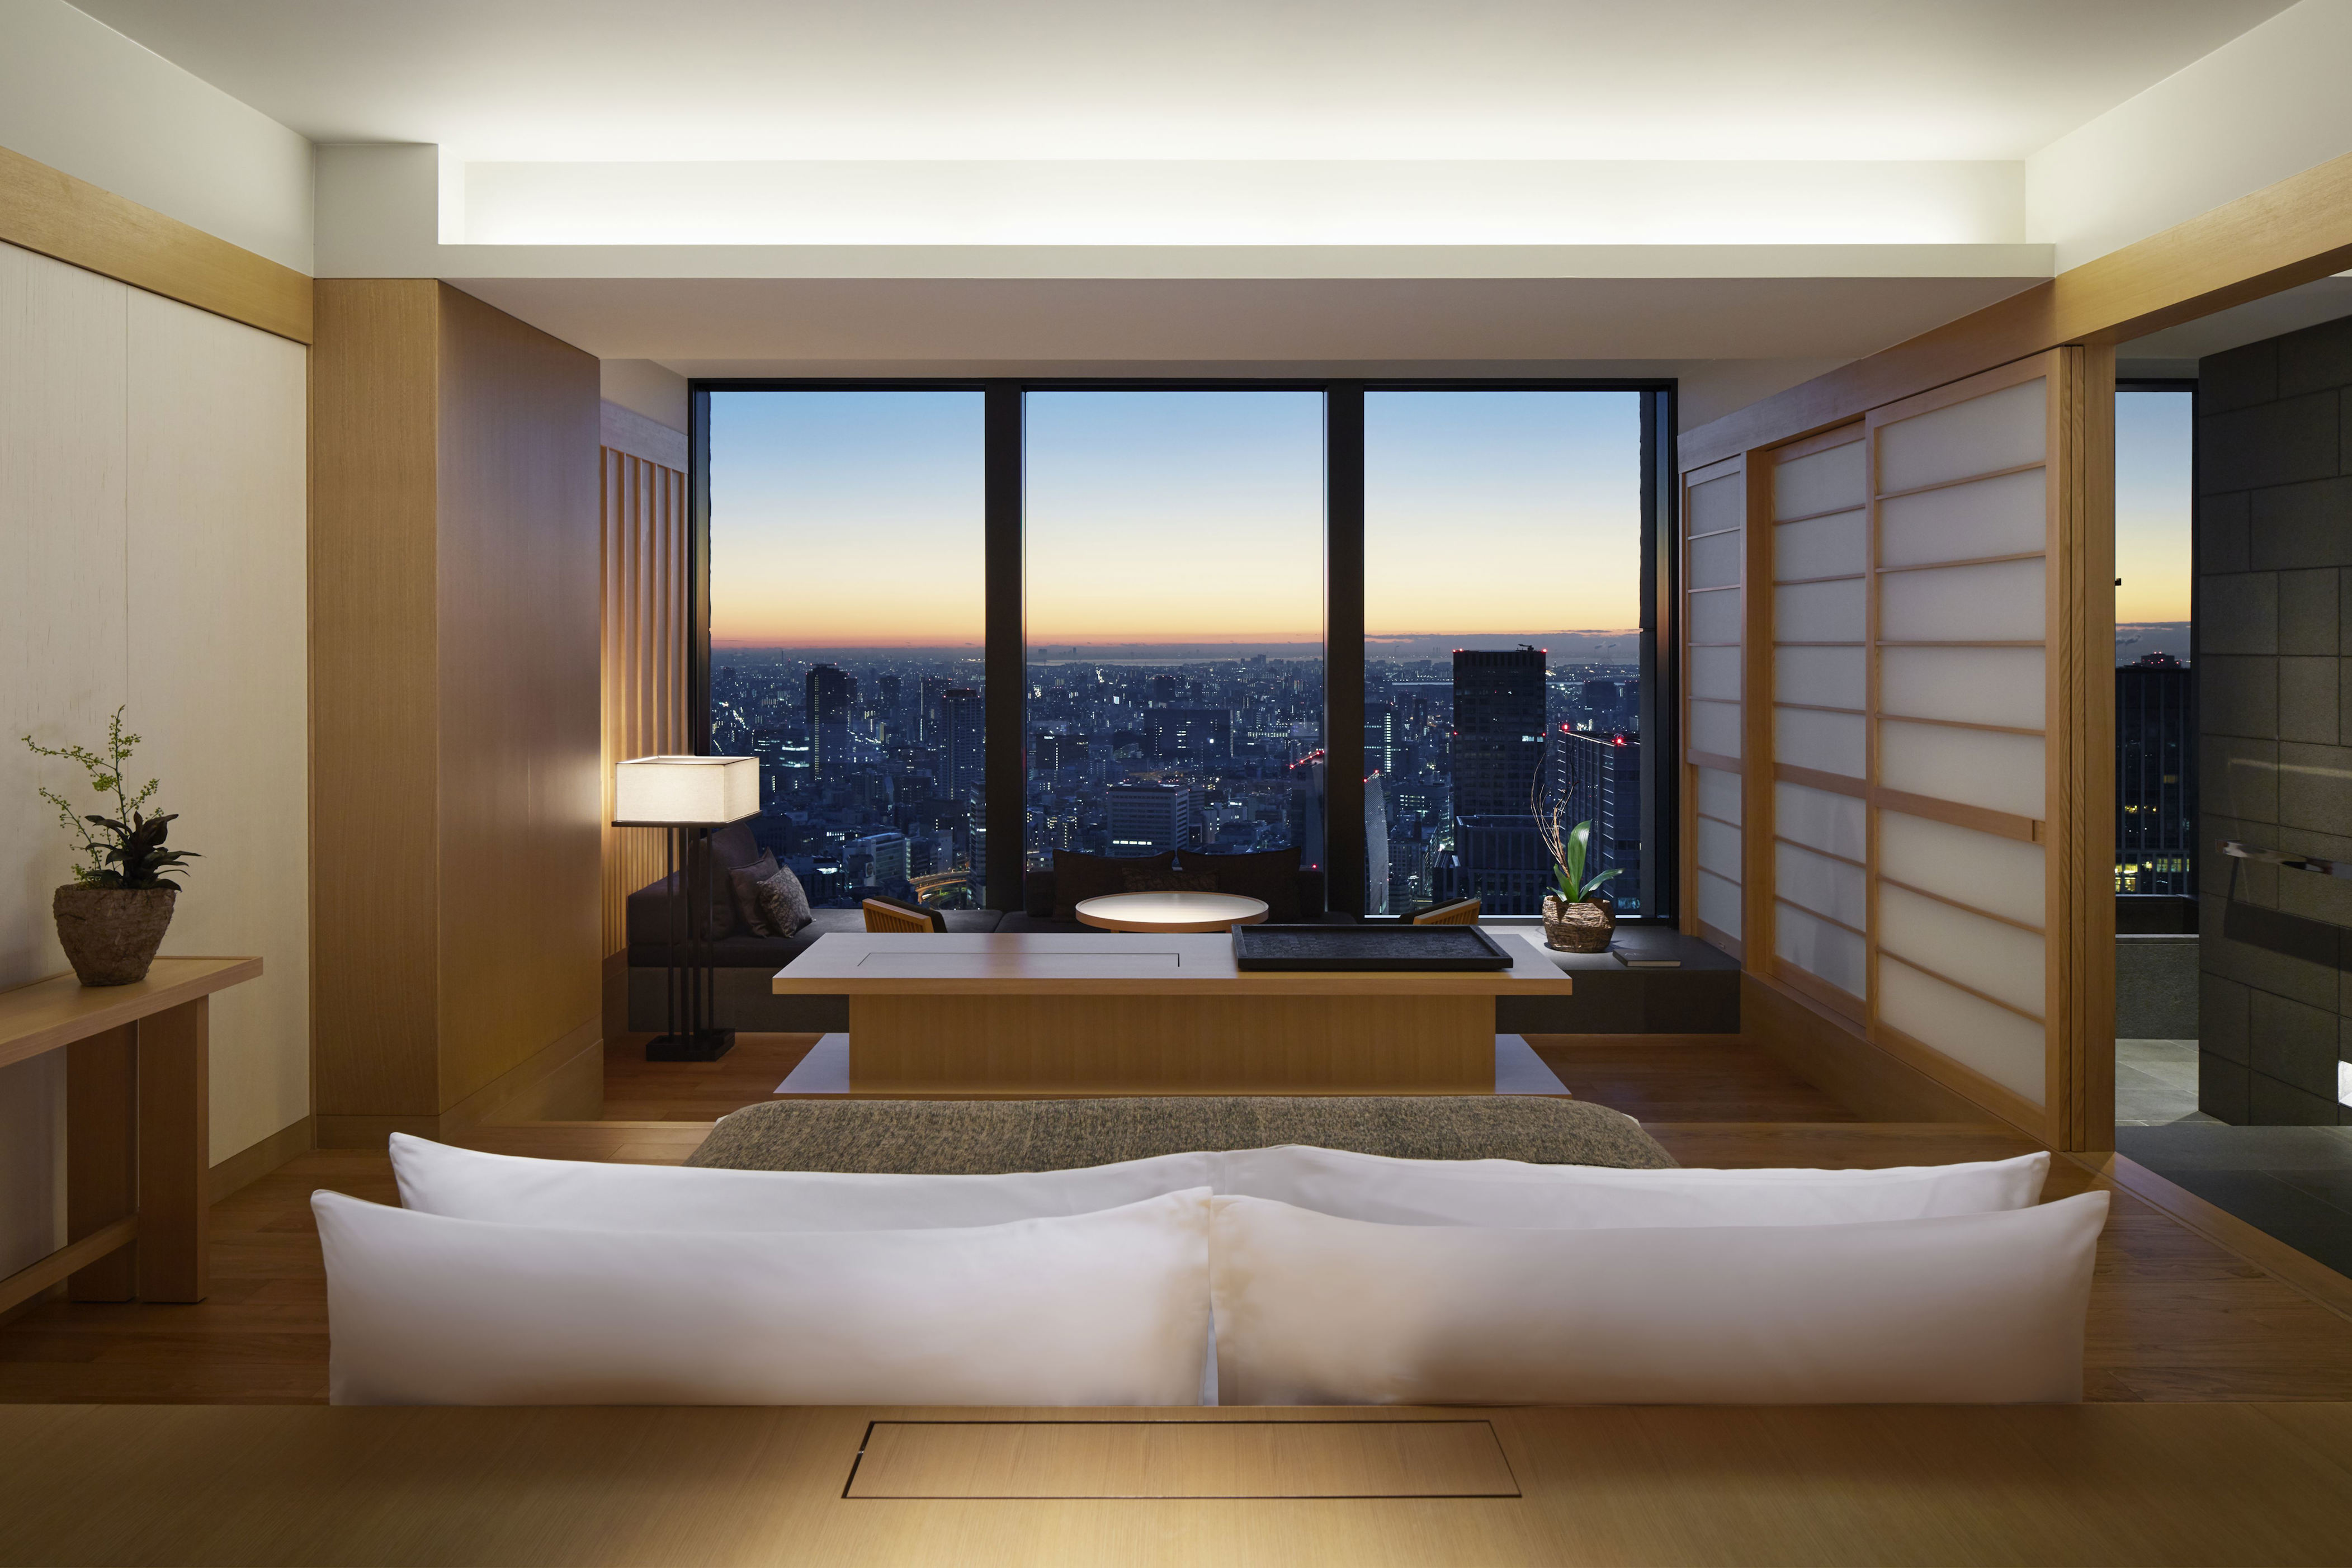 <p><a href="https://www.aman.com/hotels/aman-tokyo">Aman Tokyo</a> is not just one of the best hotels in Japan, but one of the best in the world. Named number five on the inaugural list of the <a href="https://www.theworlds50best.com/hotels/">World's 50 Best Hotels</a>, a prestigious ranking by the 50 Best Organization, it was the brand’s first urban location when it opened in 2014. A large jump for the hotel group known for remote, private luxury, the property had big promises to live up to. In its nearly 10-year existence, Aman Tokyo has delivered. Sitting on the top six floors of a 38-story skyscraper, the property offers stunning views of the city inside a tranquil, minimalist oasis.</p> <p><a href="https://cna.st/affiliate-link/44T8pouMBMznPUJivHjoAaW6VAzv47HePz9C4mD52FL2sGGGQpuGUt2HHm8bNwzW1XoKFm3QqShKe3fbsjy33npDSz5t8rZvhArxJ3UMYWVEPS7YXK8kpWQq7MDktH7gwDJp3PRbyVrJS6CJBUA2kAP1Y94qSQFJphtGyCRUrZSqSgvBWhvi8iy4P4KAniD7ZDmieLzn5r8dJDkyQGhcm99C54Rio3F67UFcfauvaGn5JC3XuFeX2U3mnVcdgJFnAvMX8c5TqdW8Y9bmyPte7vXbUAnNB2EqG7DPTrAeFvfd2jszxAZUmXfNexR6QTSoHtF6QqBHeLD6N4ps8zob5SZJGBnFEbRfhbNCe9PNqAhMd58FpmwpDCXaXzSBzKuoedDwPYoxeA885QufEVdLE9m7dGkPQLH9jdxUi3bihu6MbDrajD1W1SusqxvdfTNapA92bub52RvvwWeR25jroZV9AJXg8GbwMmiPrAFHjXuxvhaFQcz7UiwFwX4dyfLo5E8acydgky" rel="sponsored"><em>Book now</em></a>.</p><p>Sign up for our newsletter to get the latest in design, decorating, celebrity style, shopping, and more.</p><a href="https://www.architecturaldigest.com/newsletter/subscribe?sourceCode=msnsend">Sign Up Now</a>